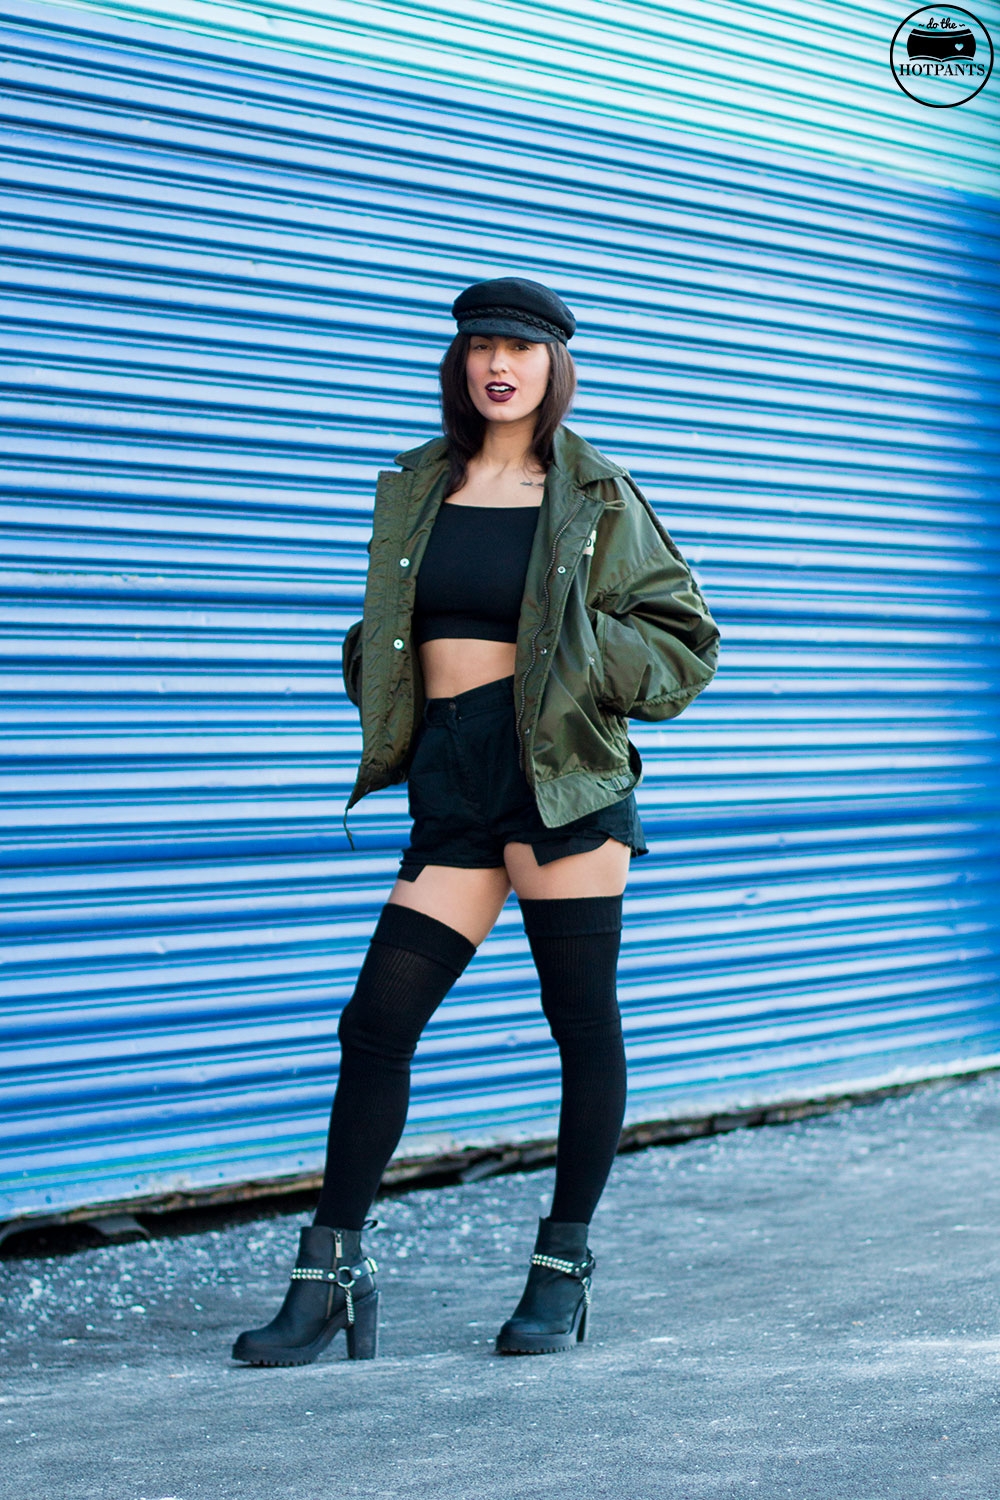 Do The Hotpants Dana Suchow Bomber Jacket Crop Top Thigh Highs Curvy Woman NYC Fashion IMG_8024